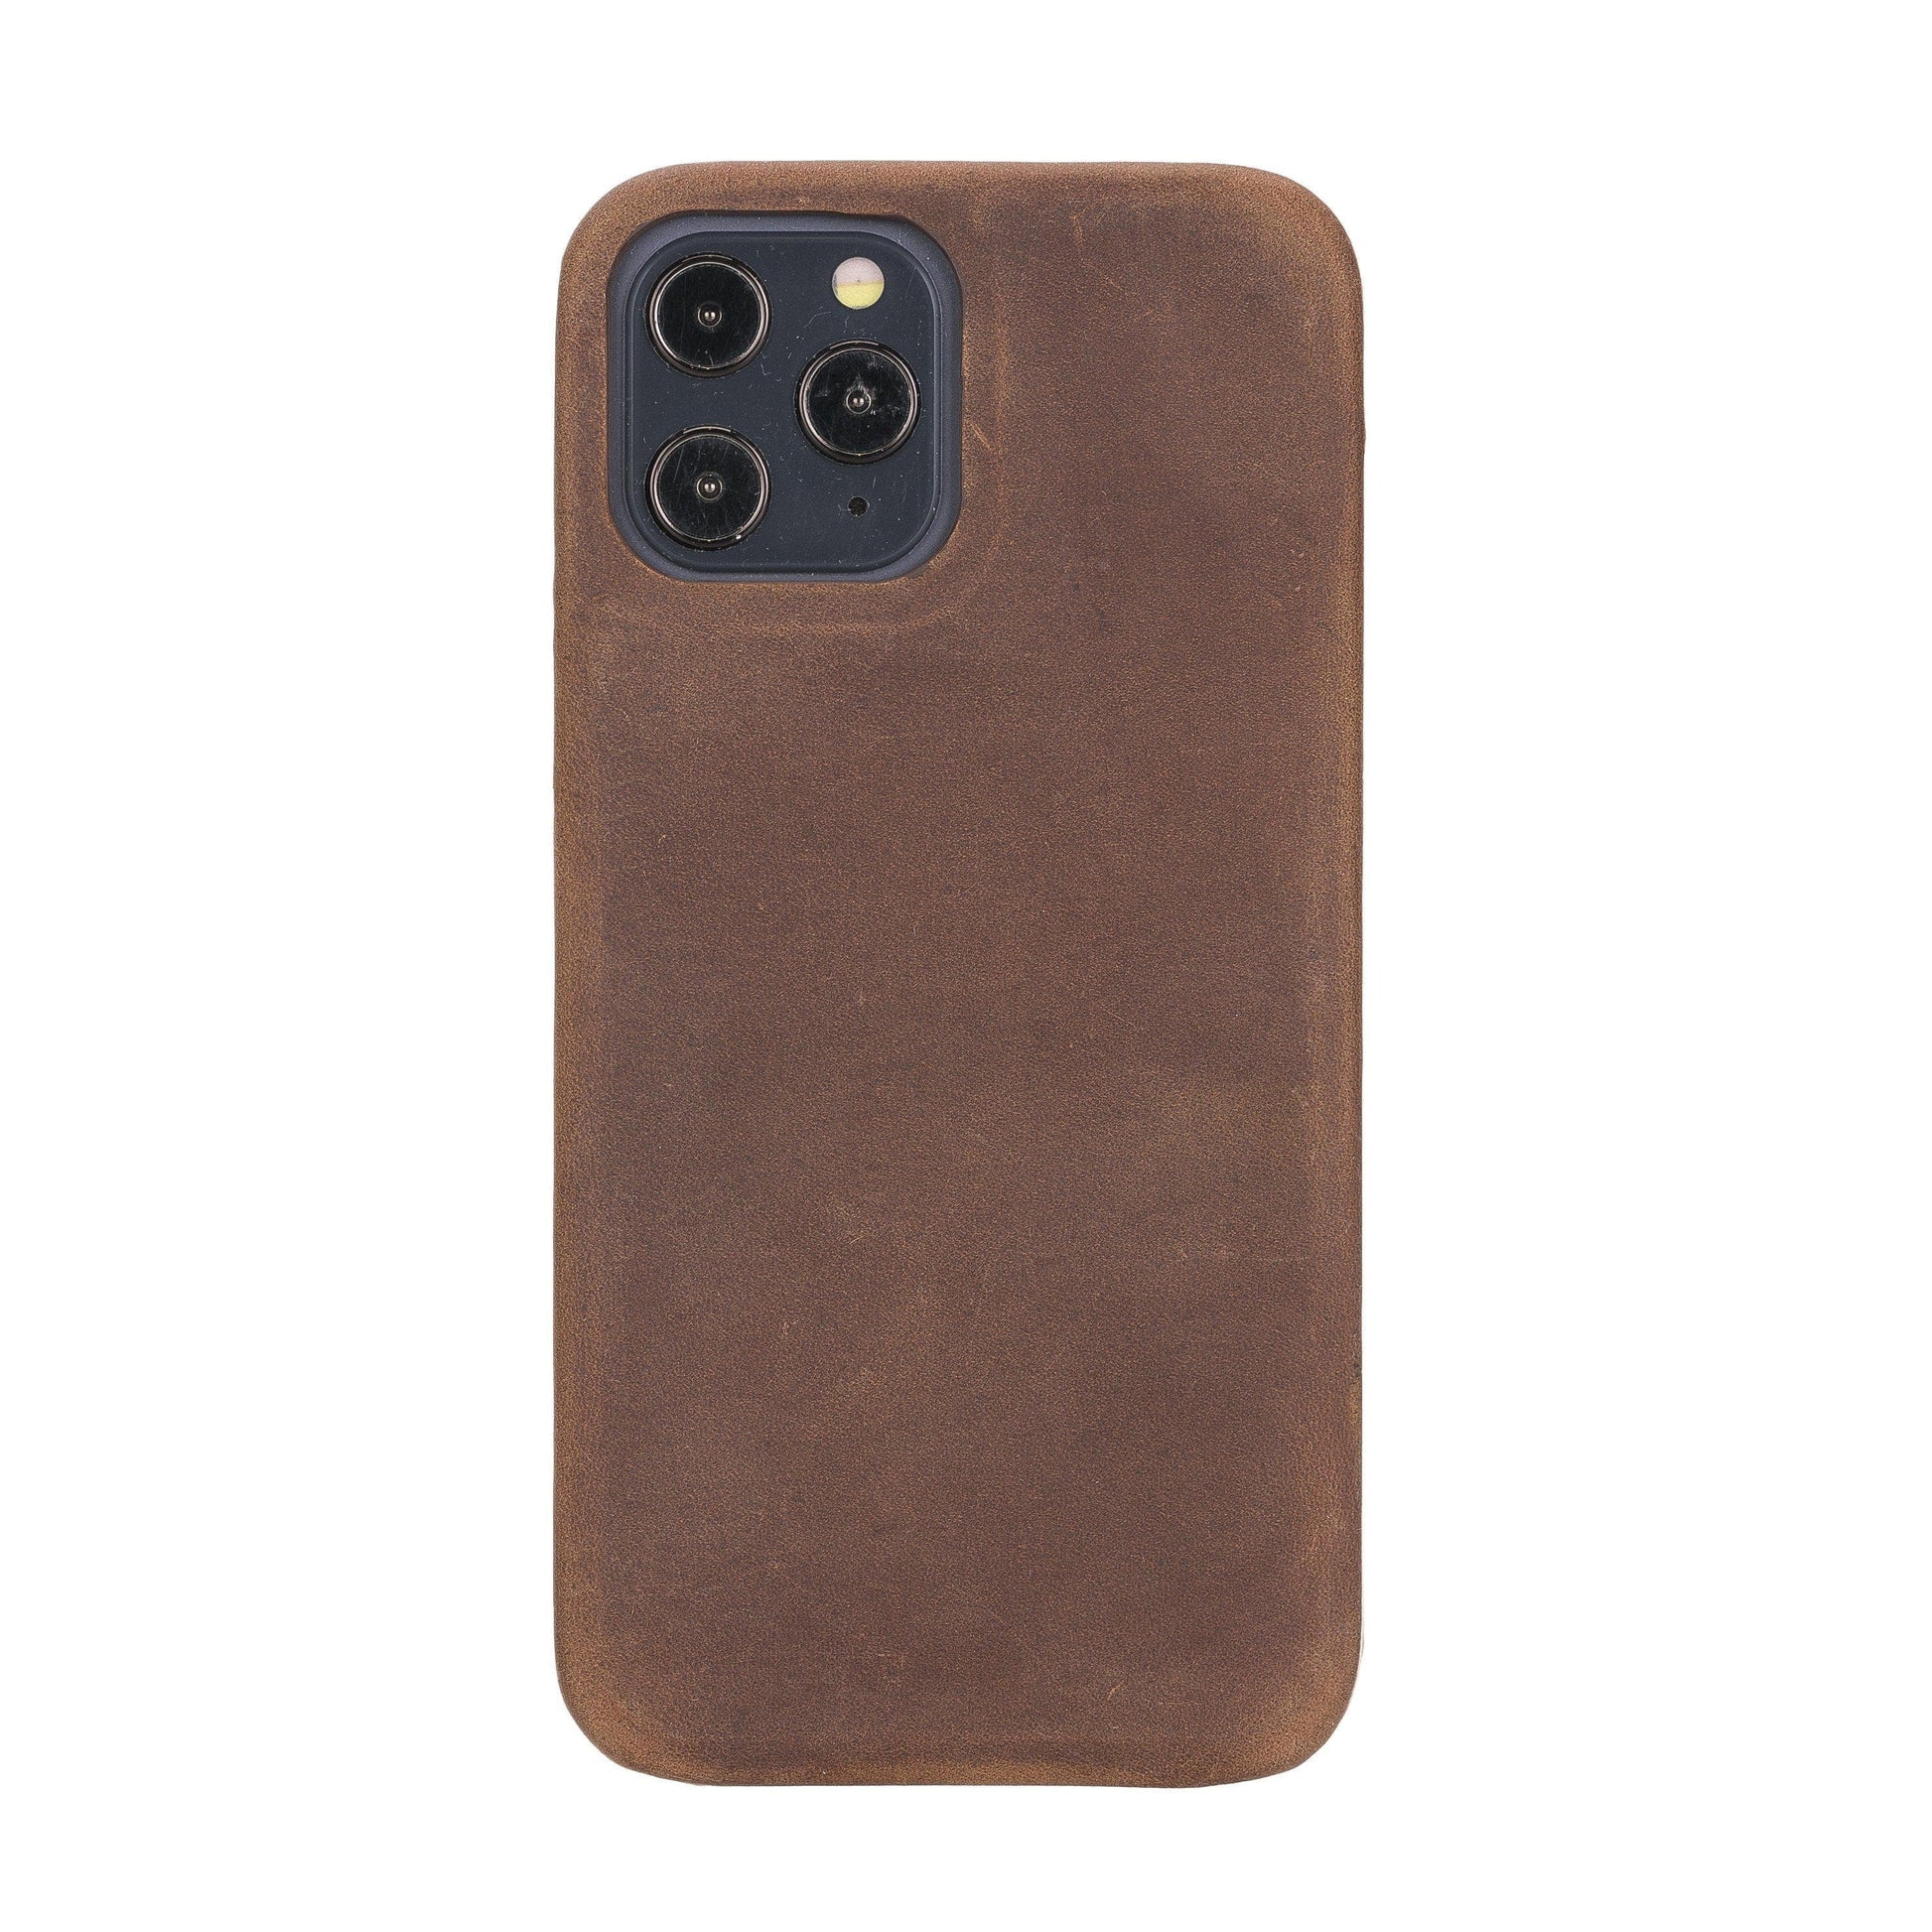 Apple iPhone 12 Pro Max 6.7 Book Genuine Leather Special Case Cover, Brown